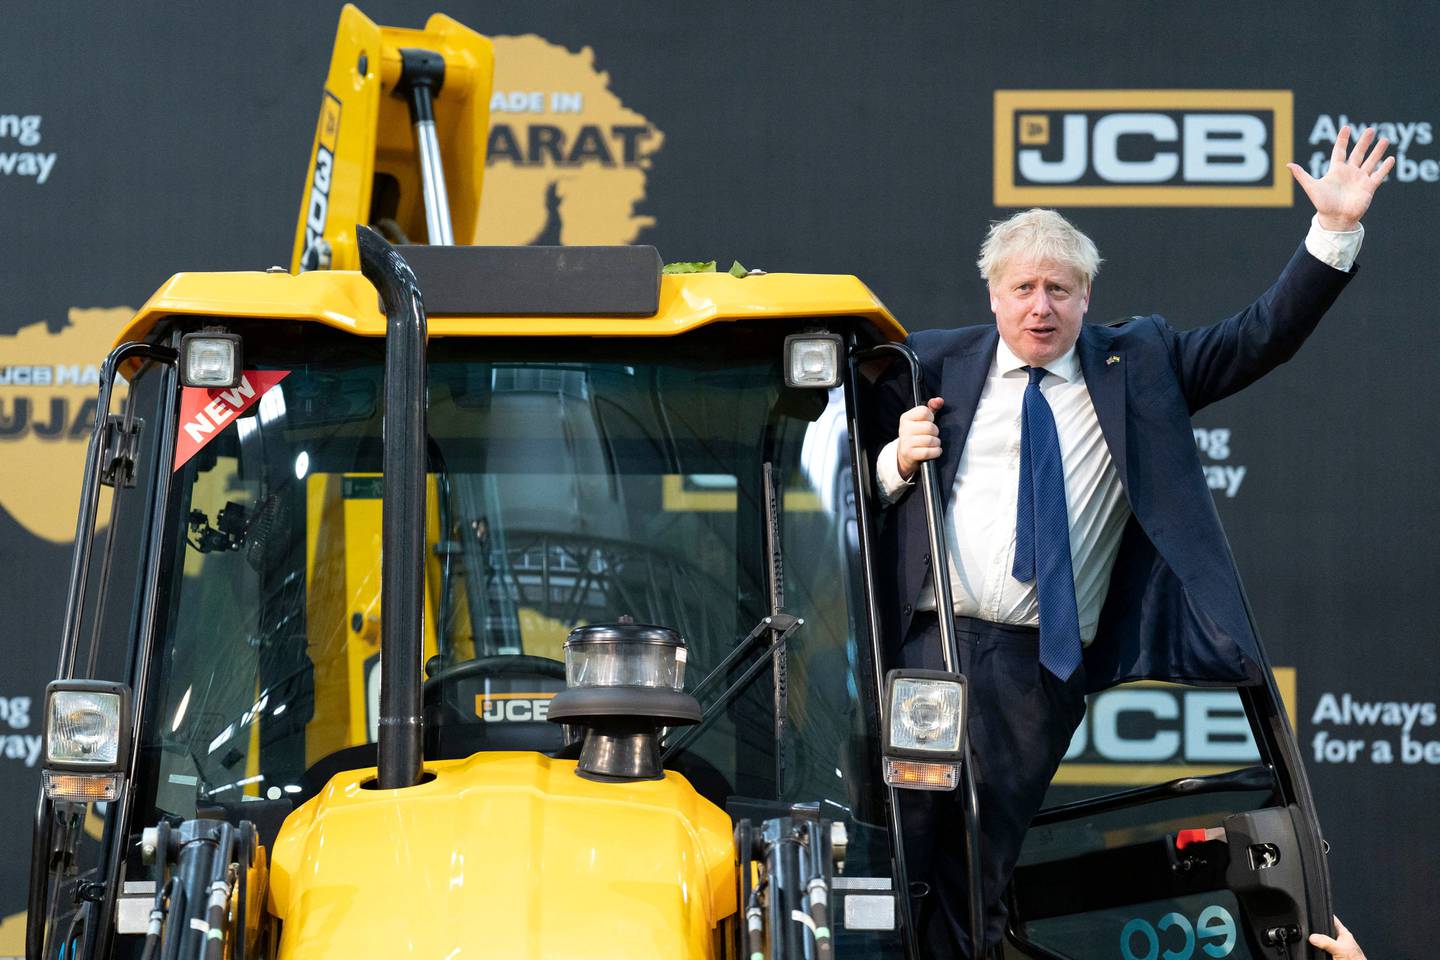 Britain's Prime Minister Boris Johnson waves from an excavator during his visit to the JCB factory in Vadodara. AFP 